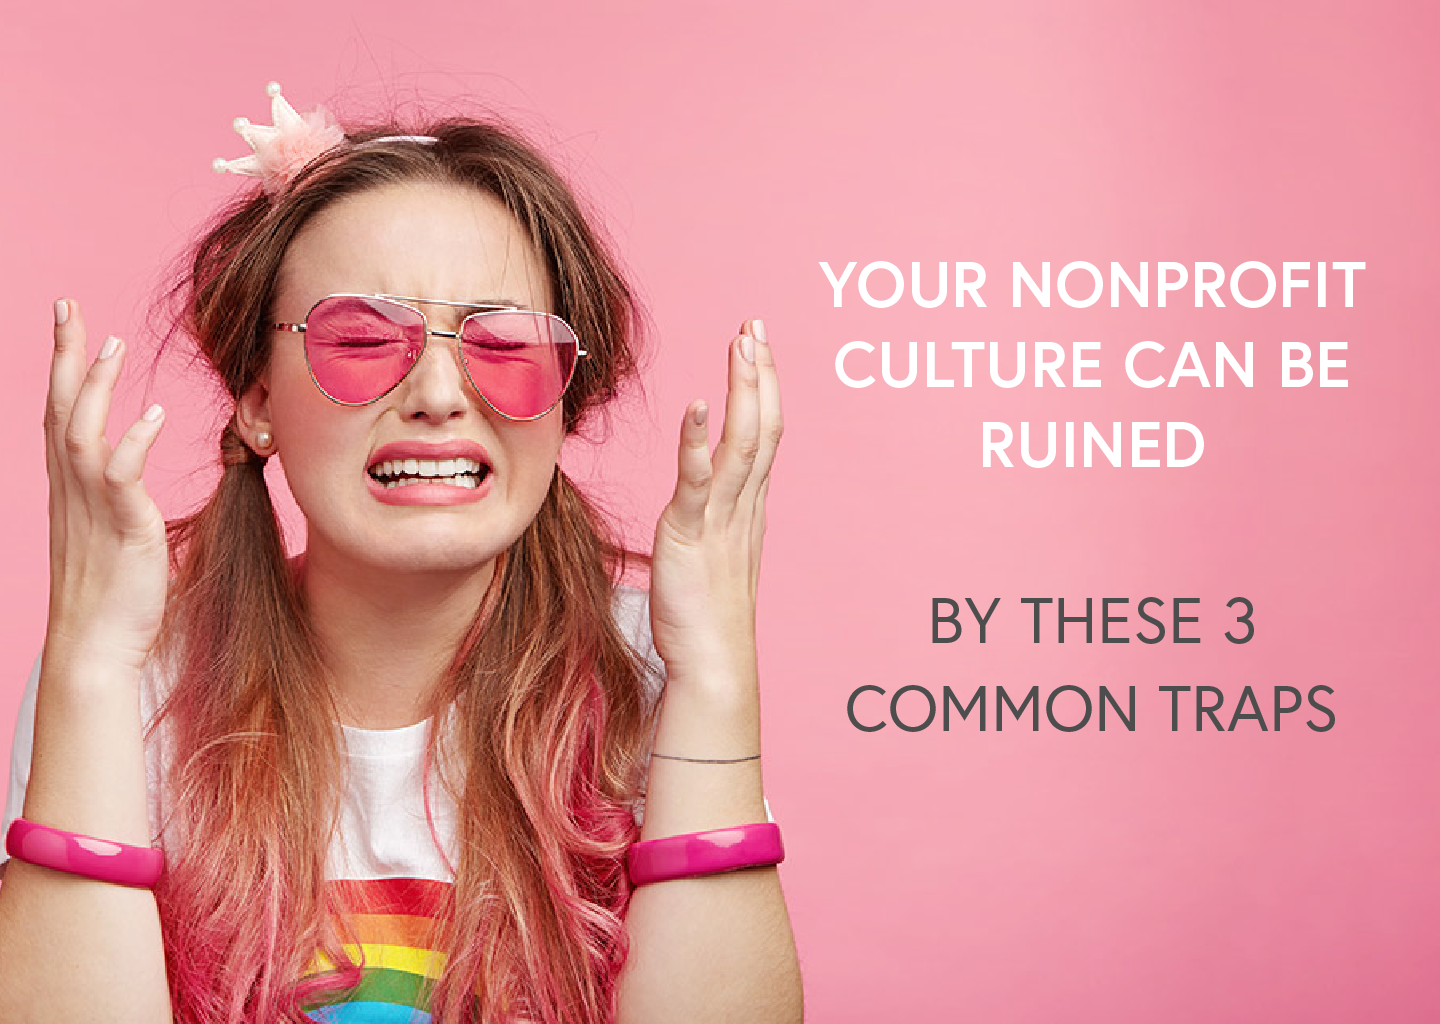 Your Nonprofit Culture Can Be Ruined by These 3 Common Traps